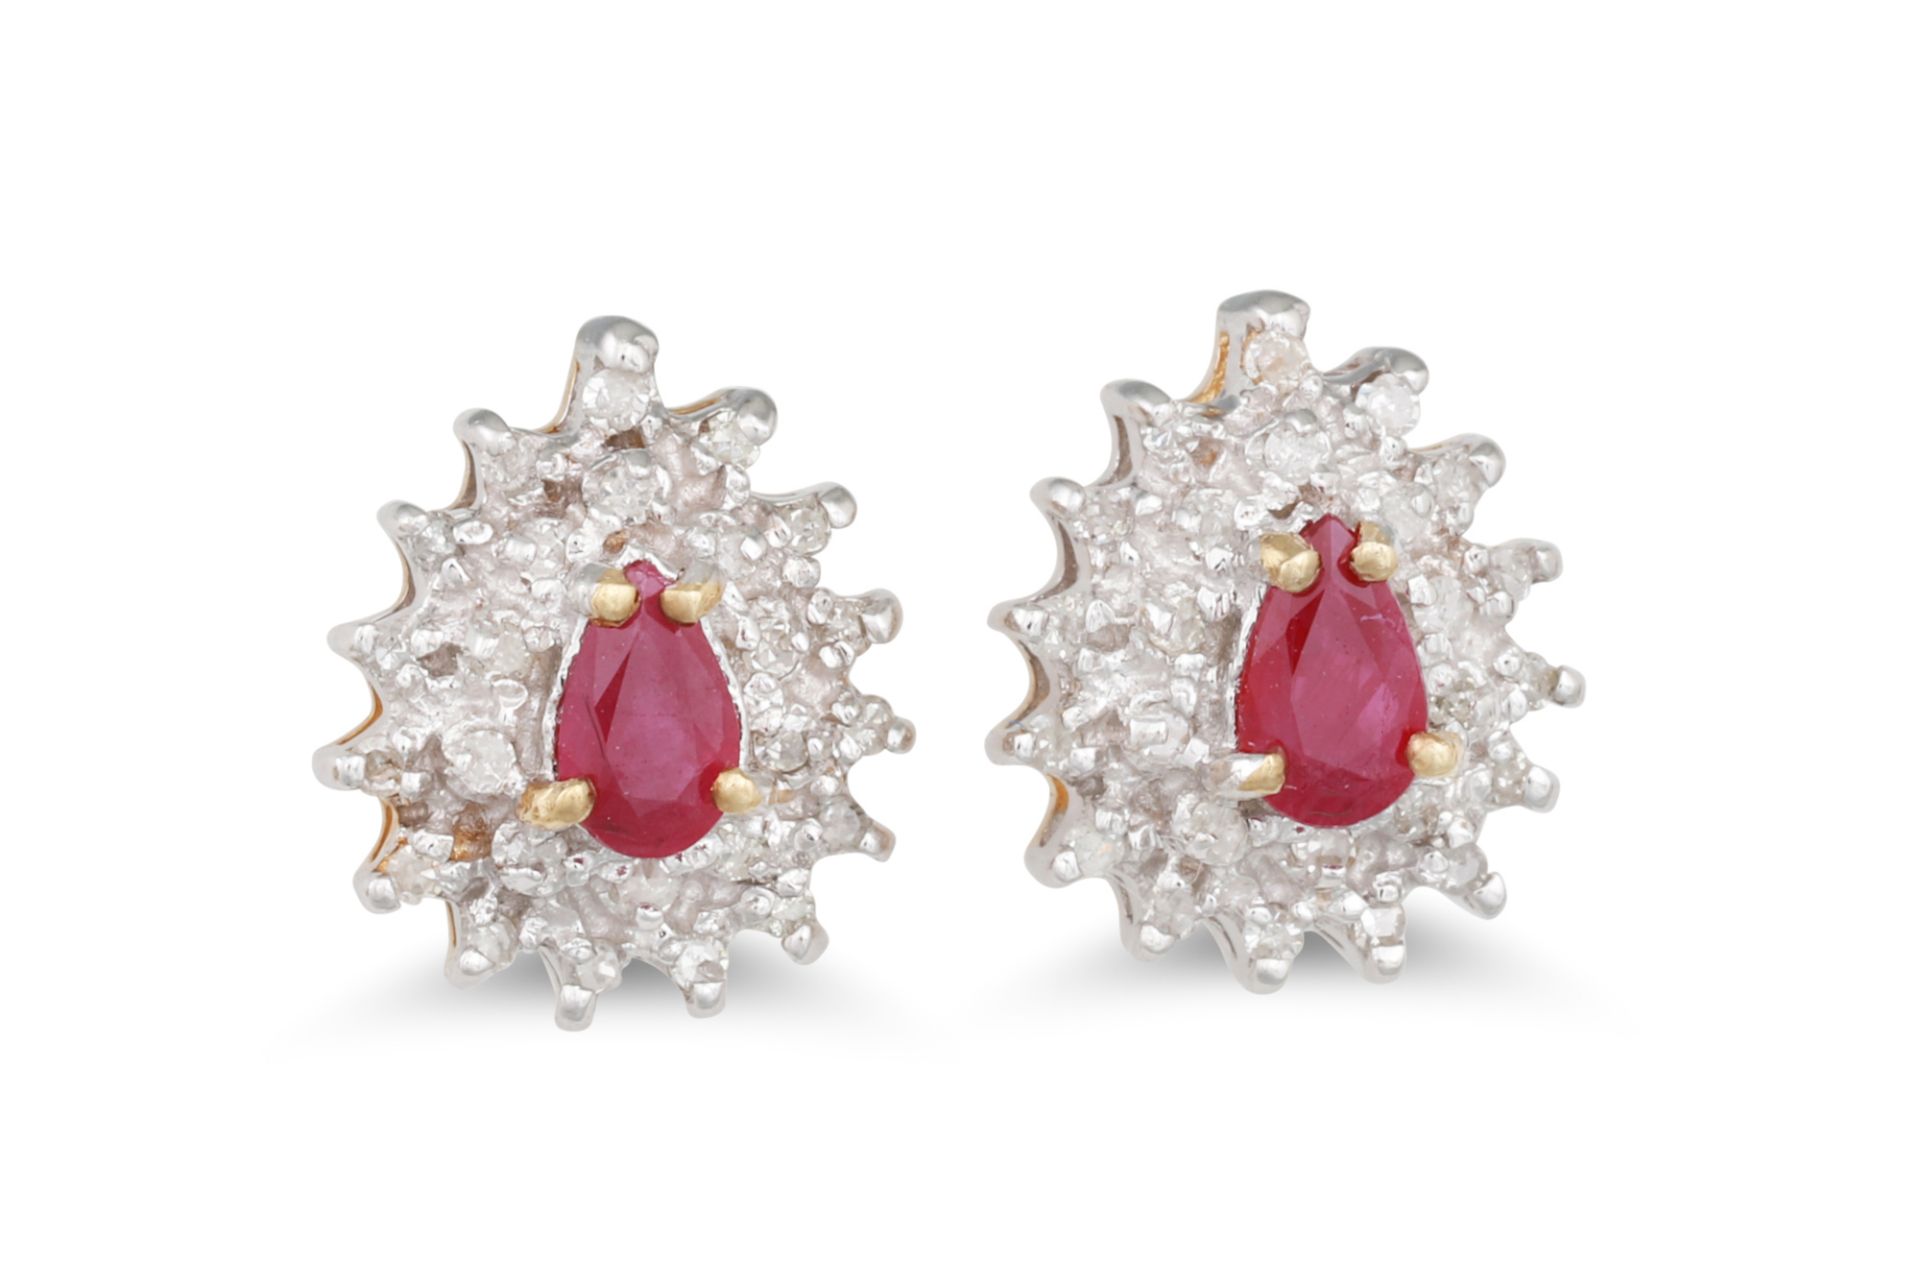 A PAIR OF DIAMOND AND RUBY CLUSTER EARRINGS, the pear shaped rubies to diamond surrounds, mounted in